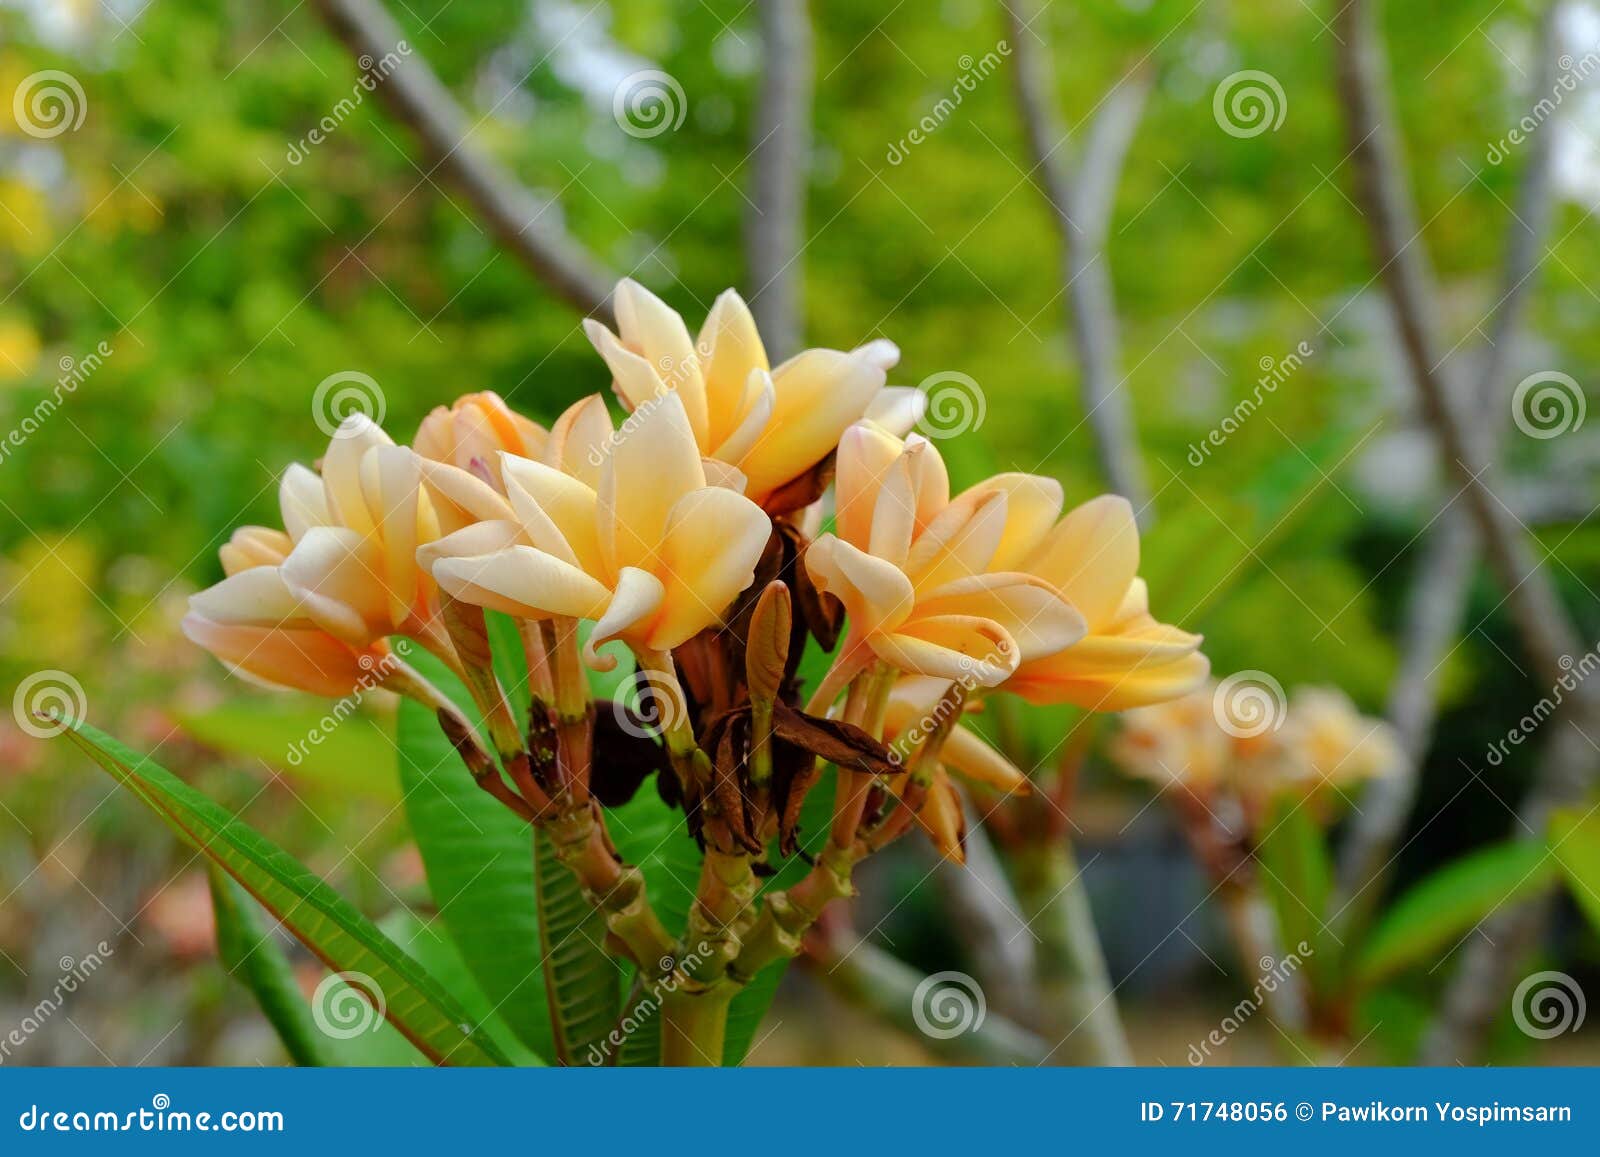 Plumeria Flowers with Beautiful Colors Stock Photo - Image of colors ...